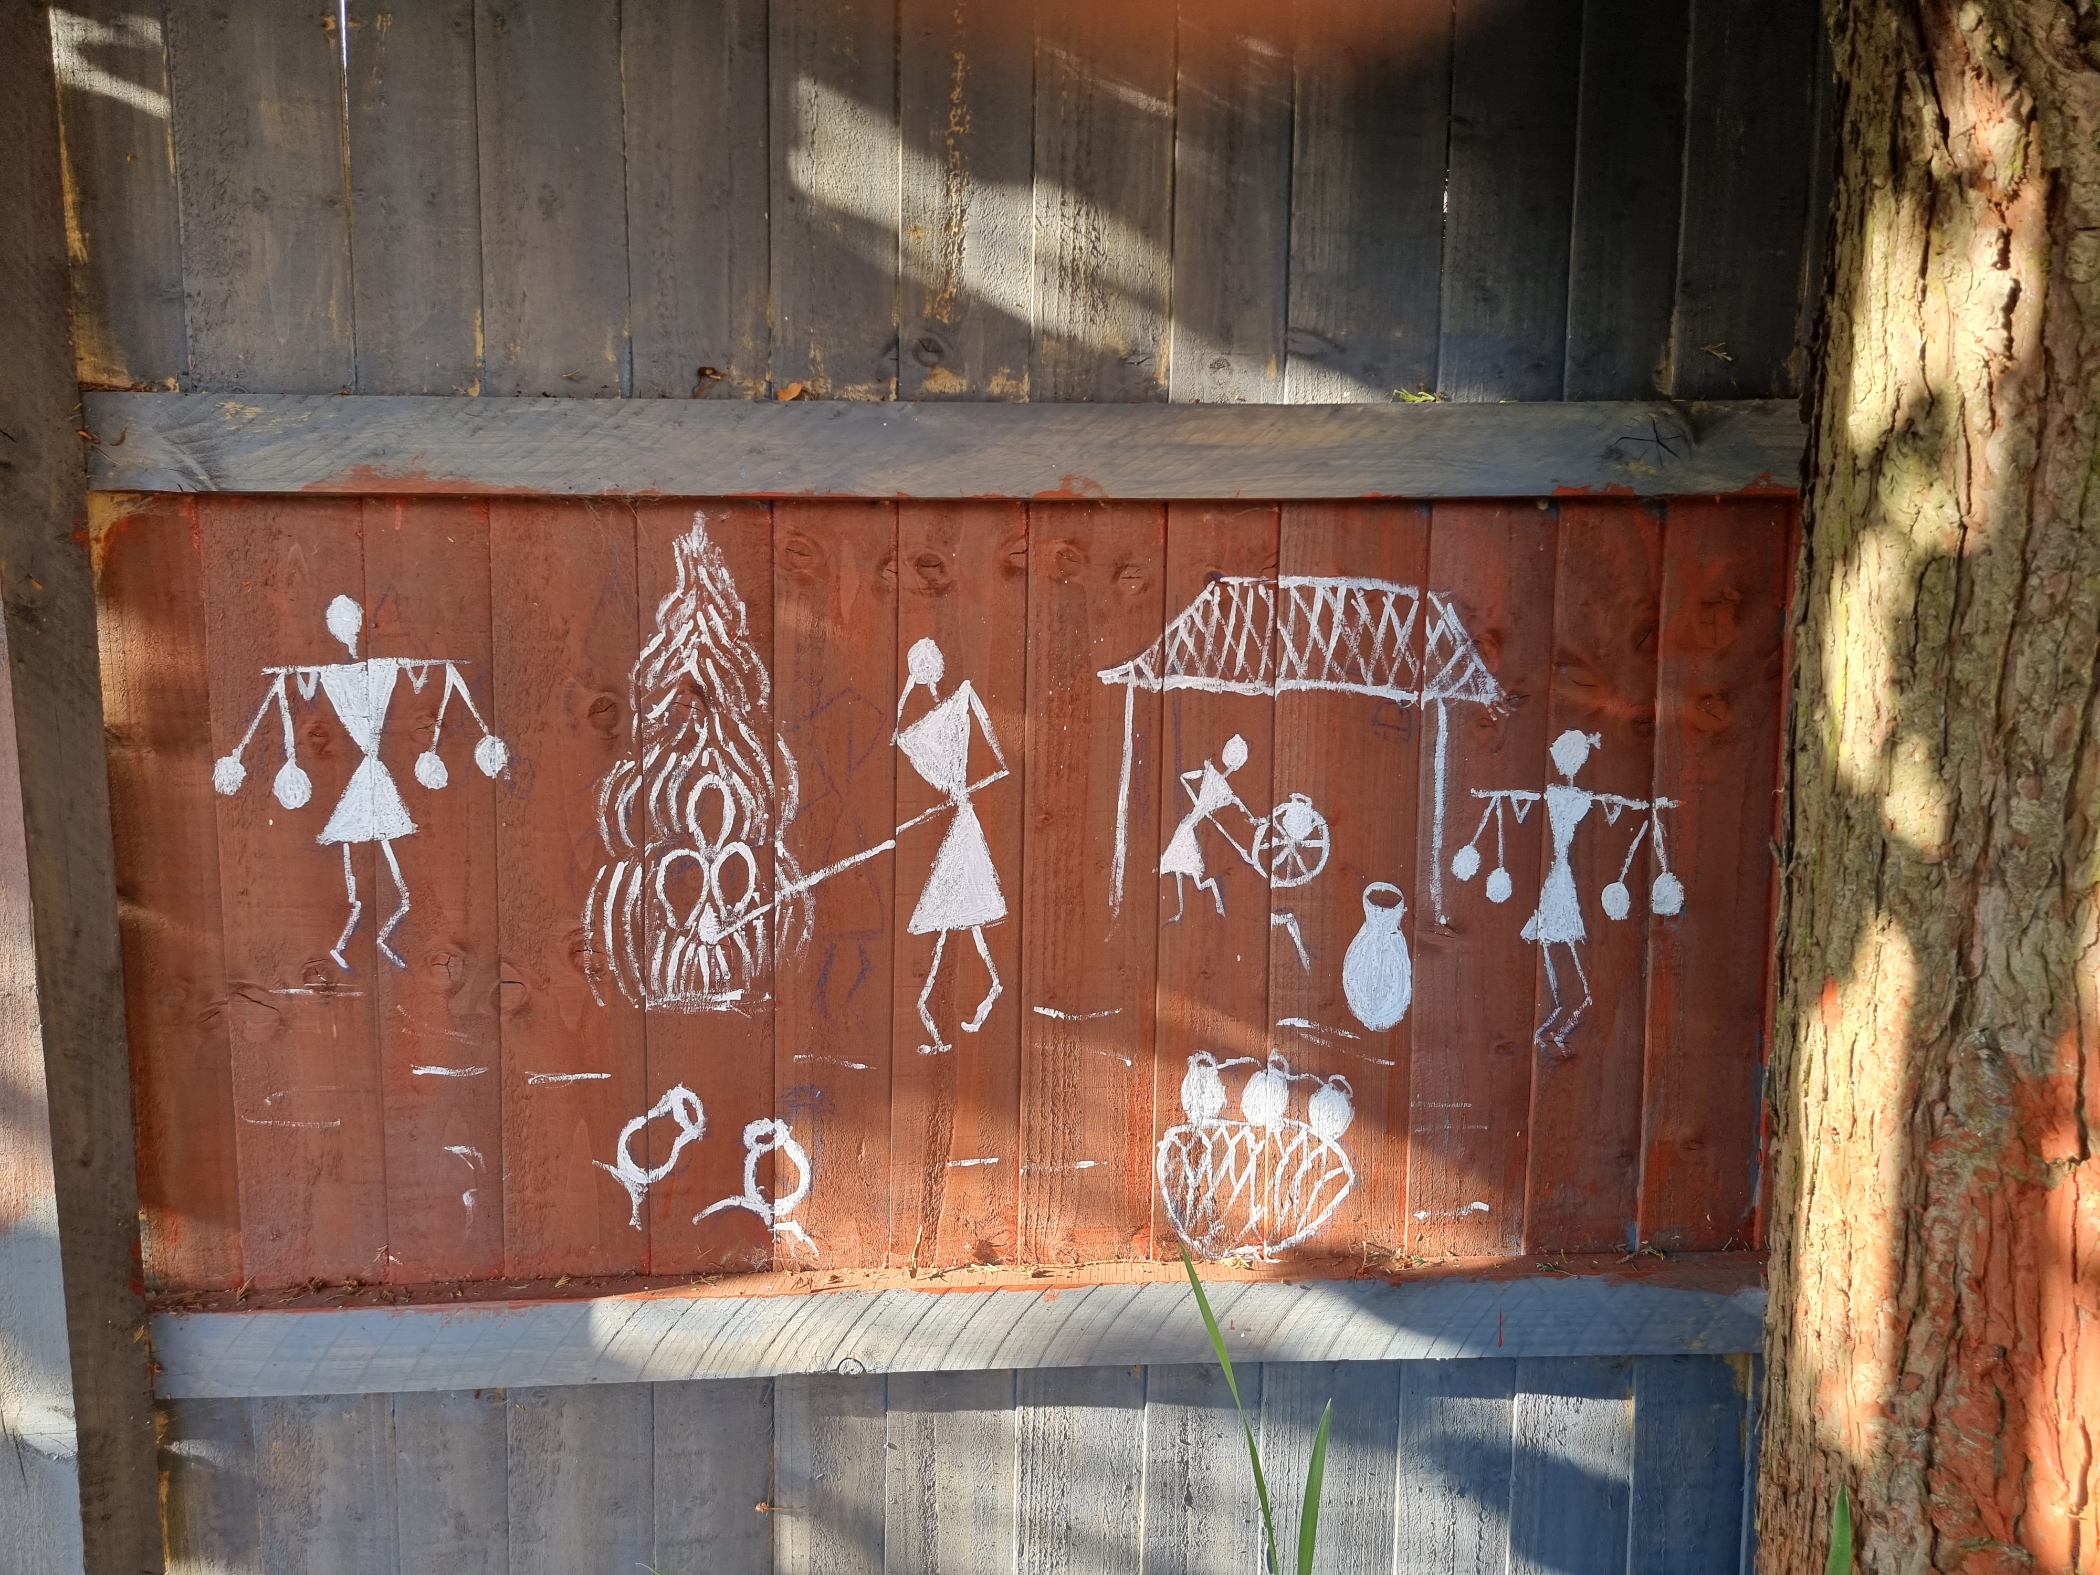 Painting on fence of white stick figures